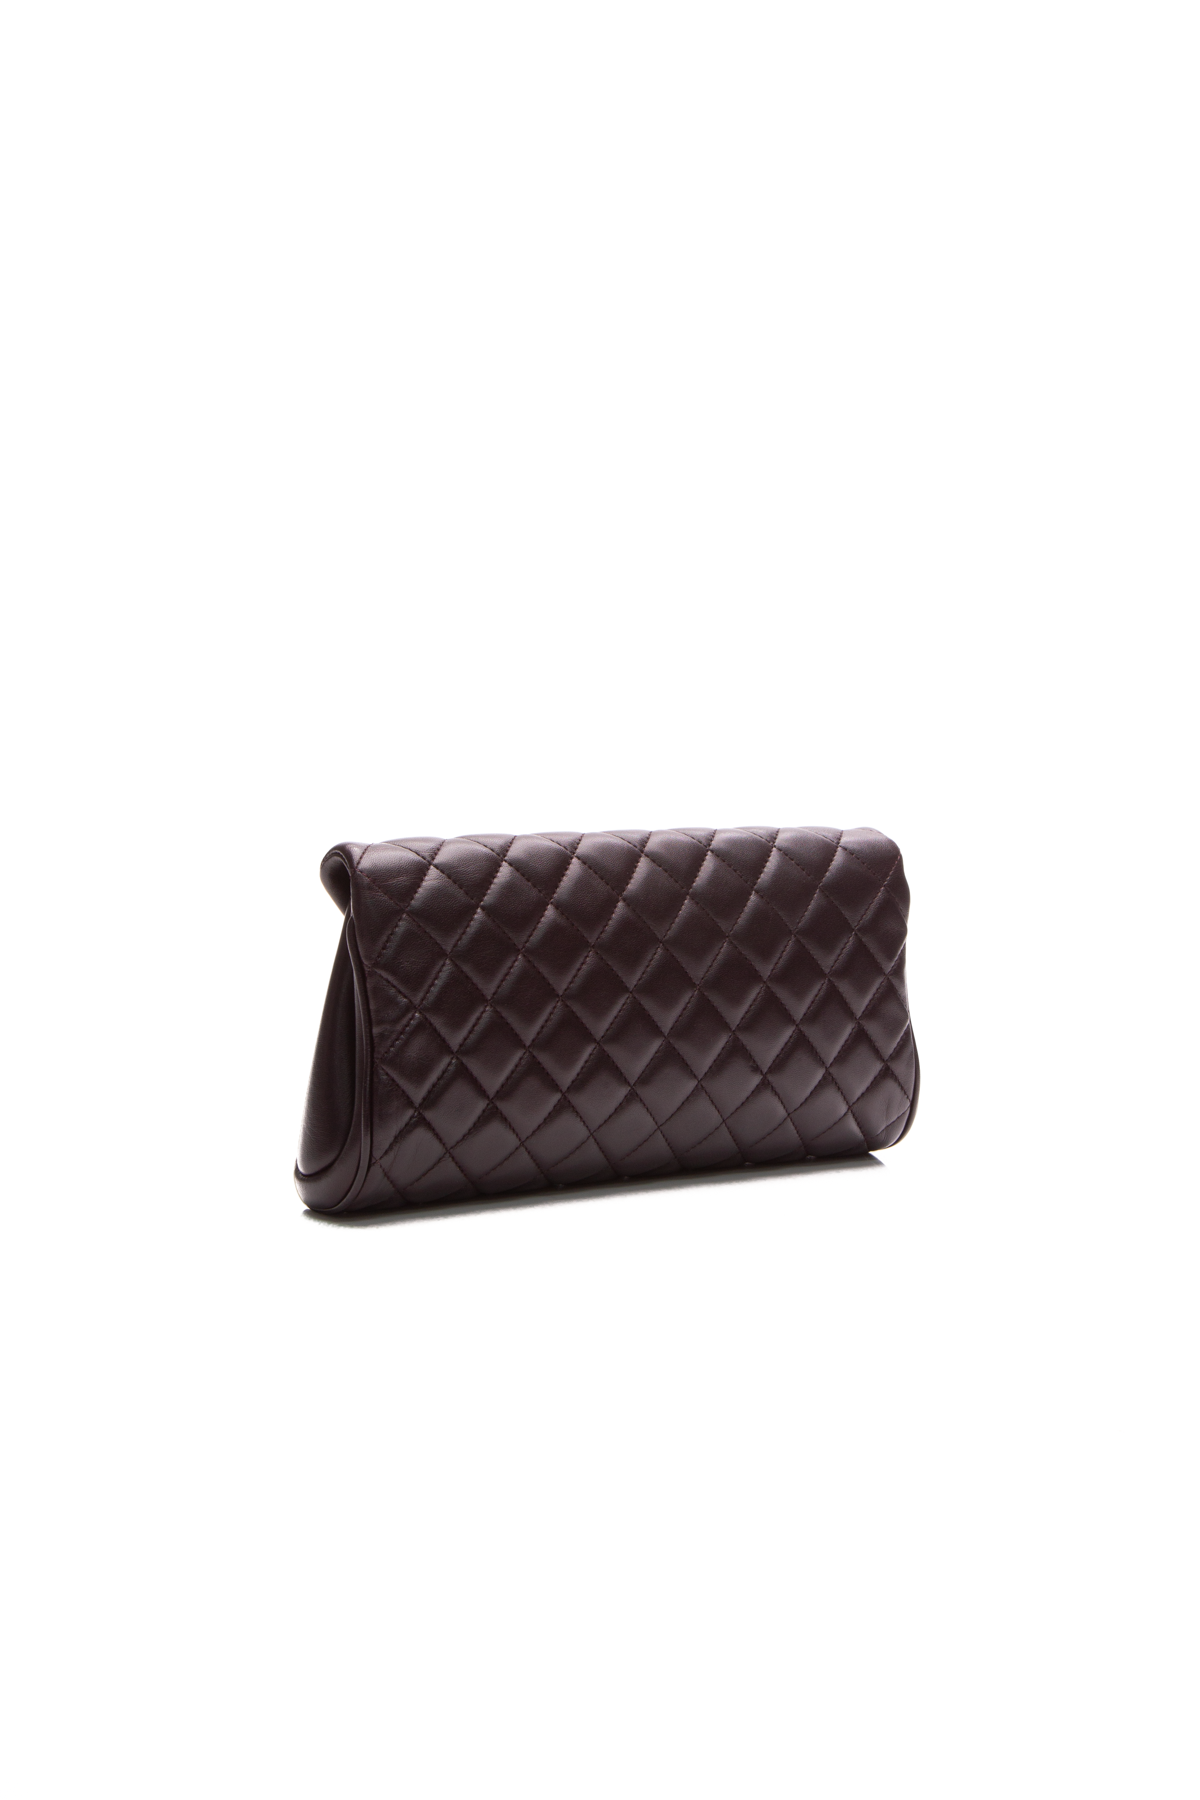 Chanel Timeless Clutch in Dark Red Chevron Quilted Lambskin - SOLD